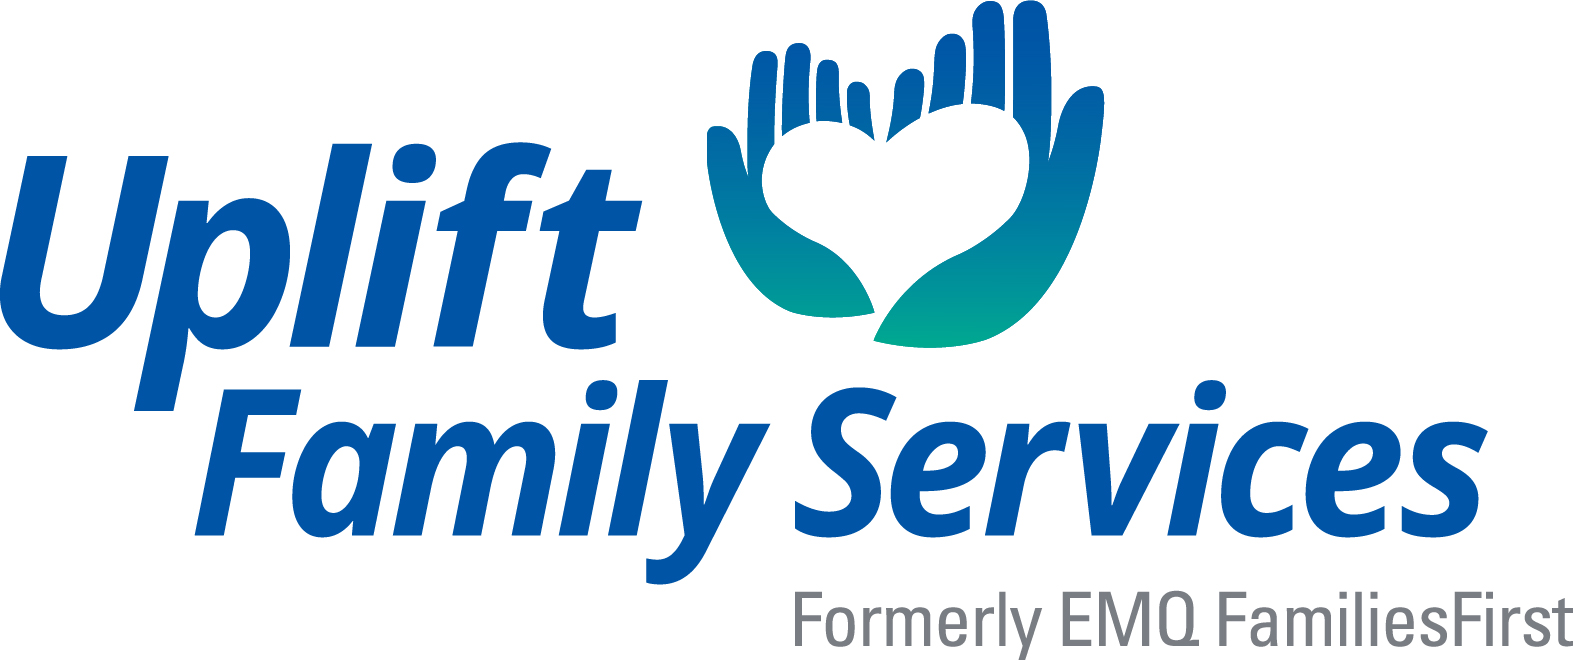 uplift family services, formerly emq familiesfirst